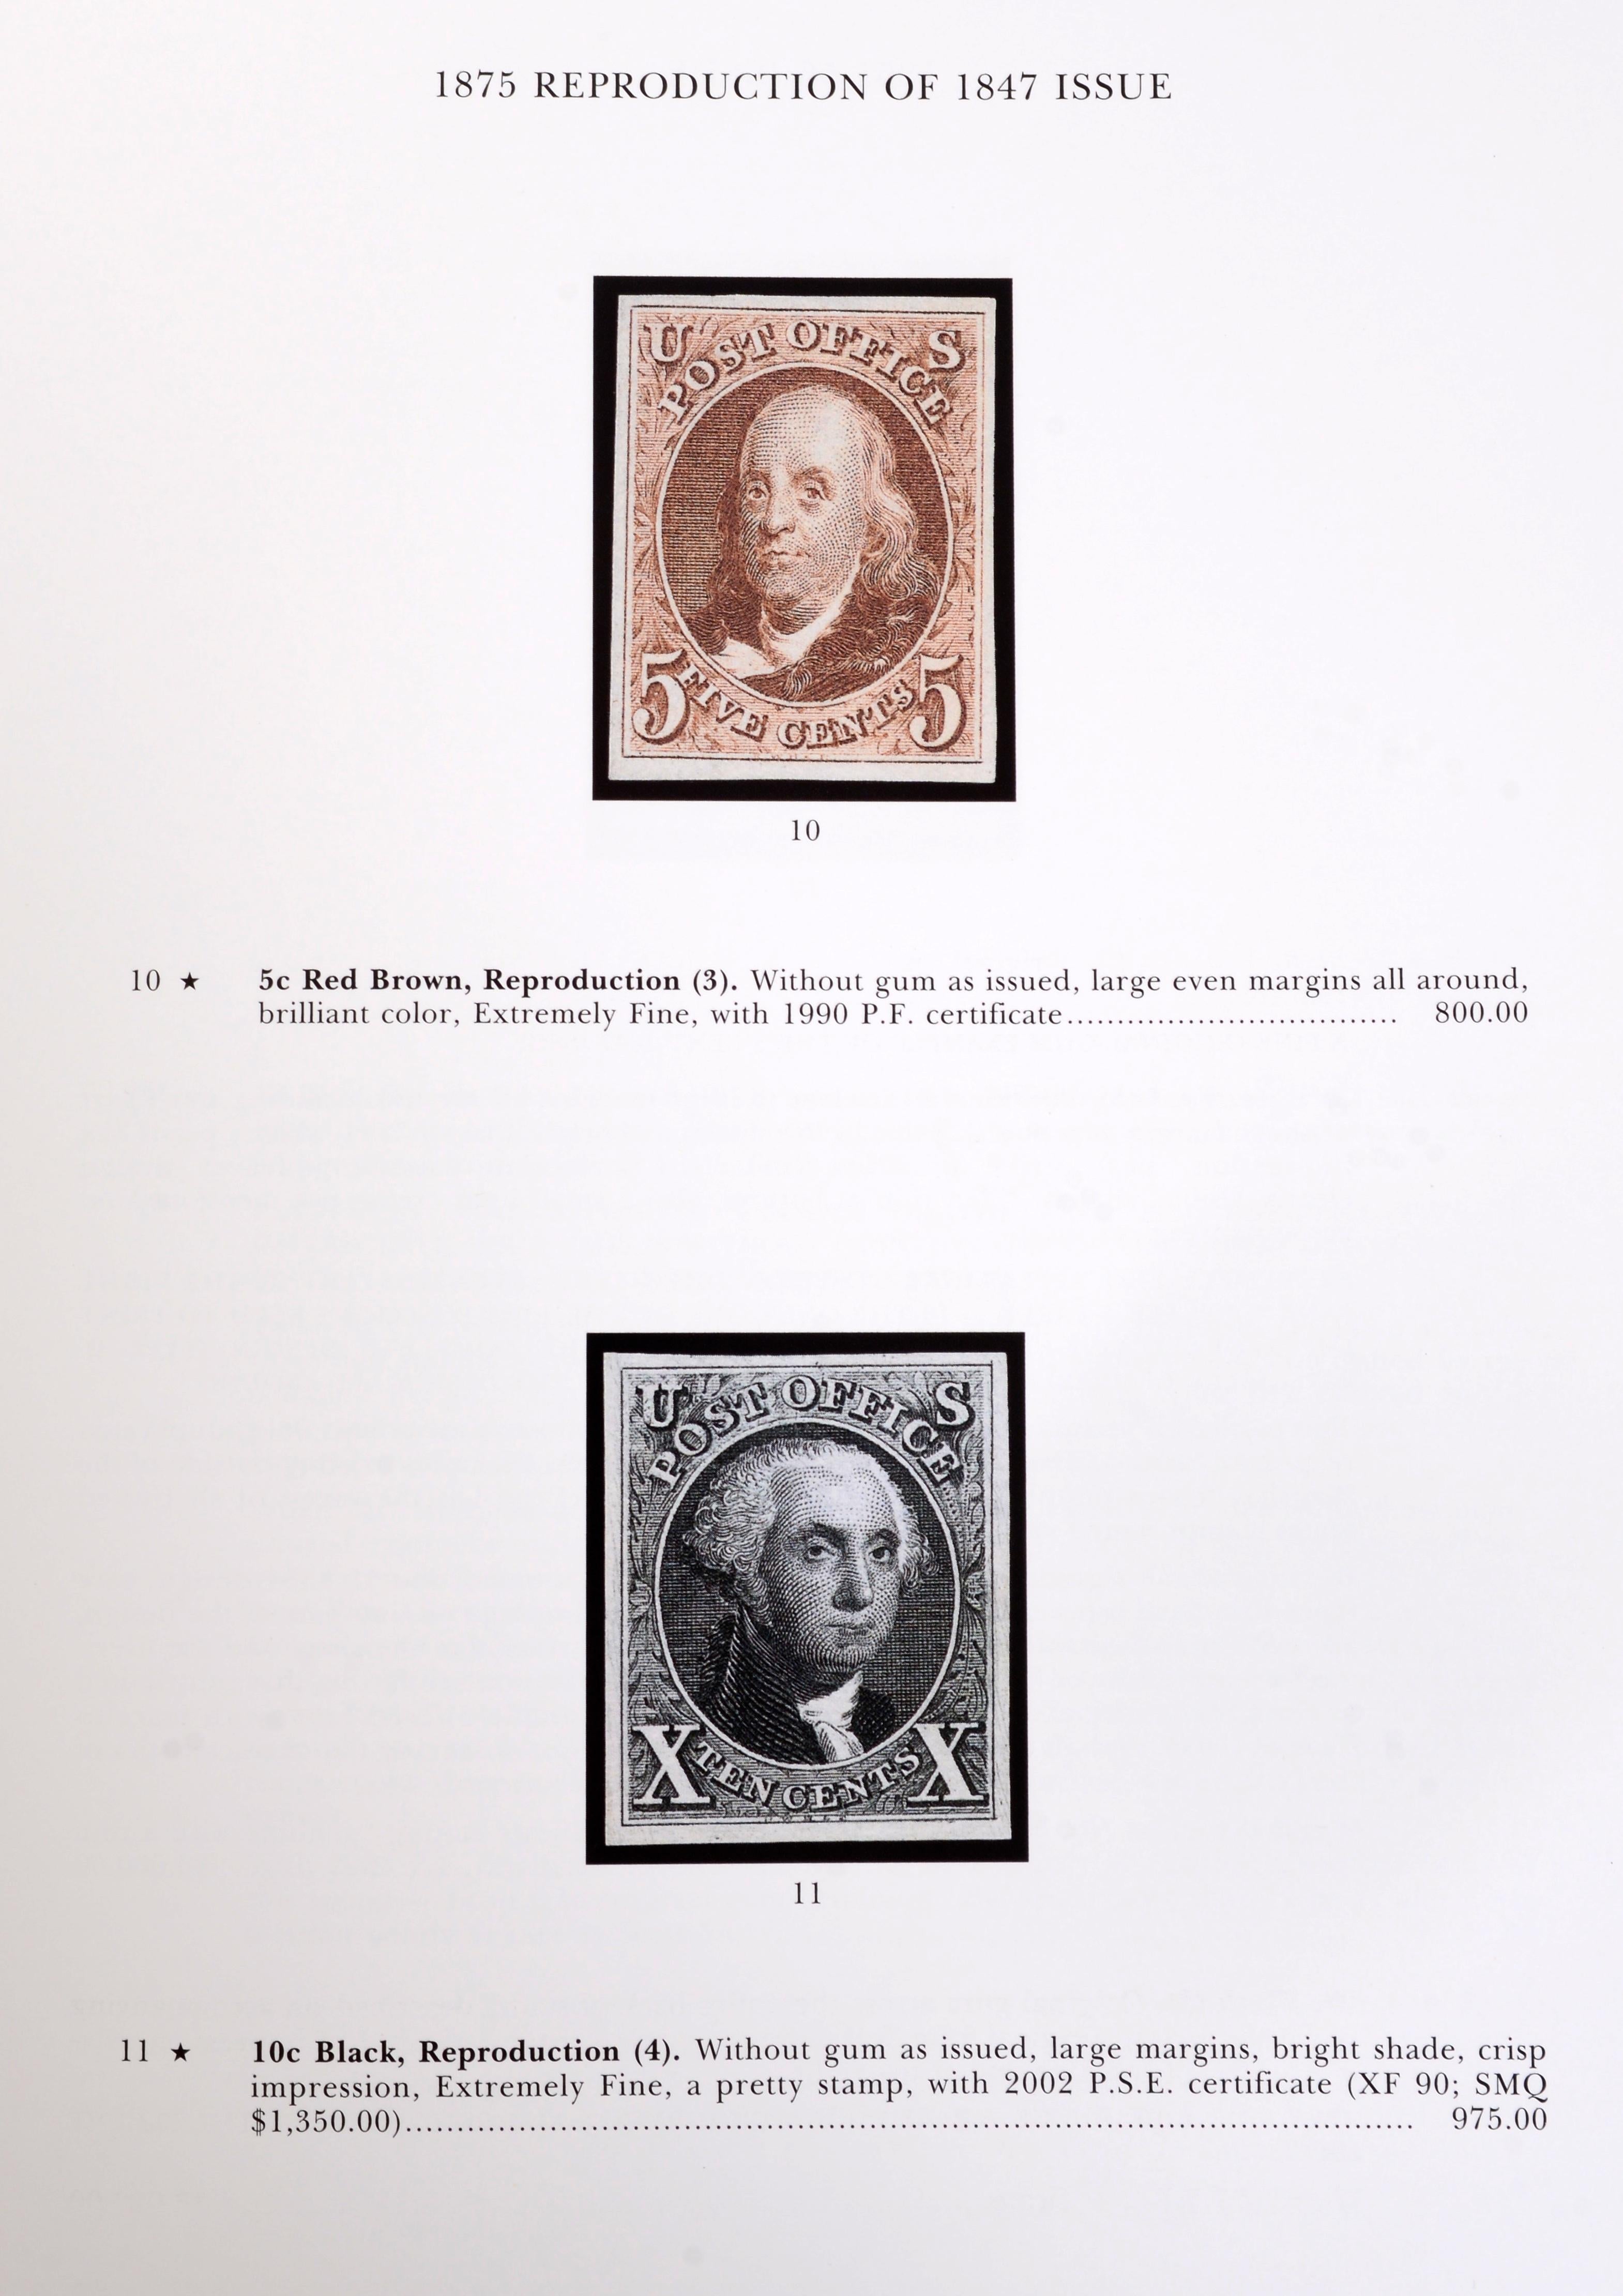 Paper The Jay Hoffman Collection of United States Stamps: by Robert A. Siegel Auction  For Sale